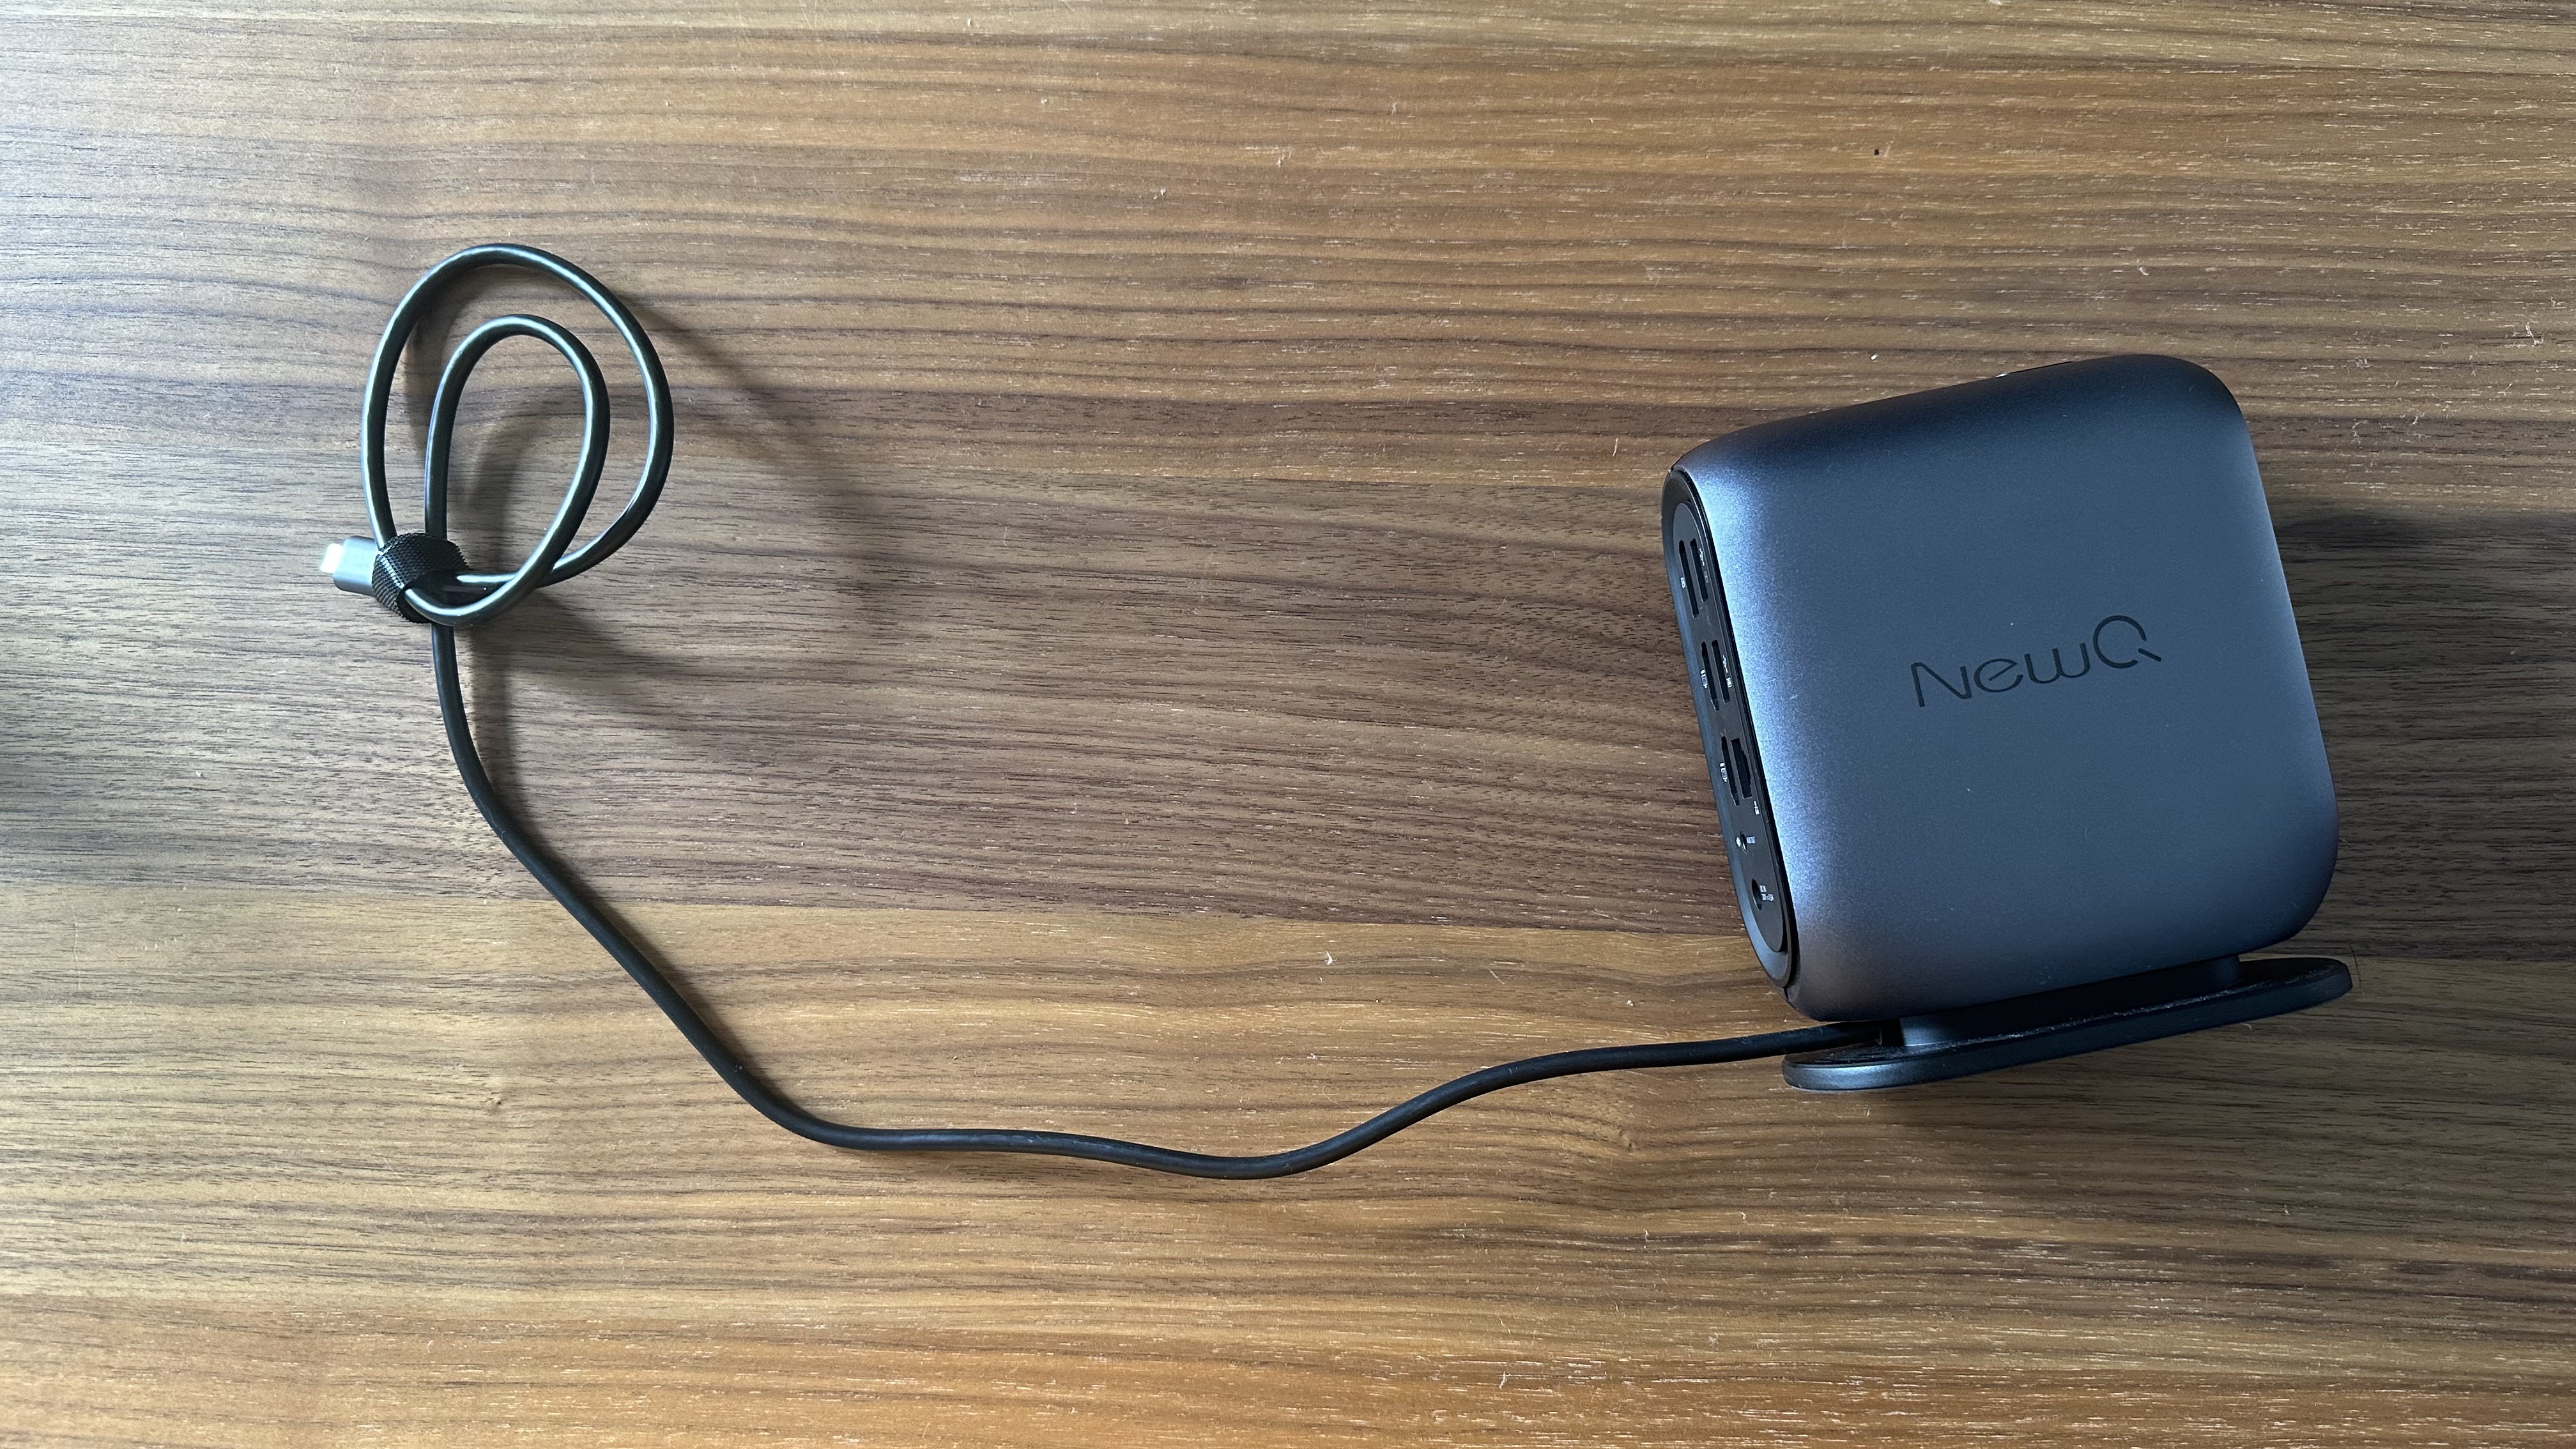 NewQ 16-in-1 Docking Station